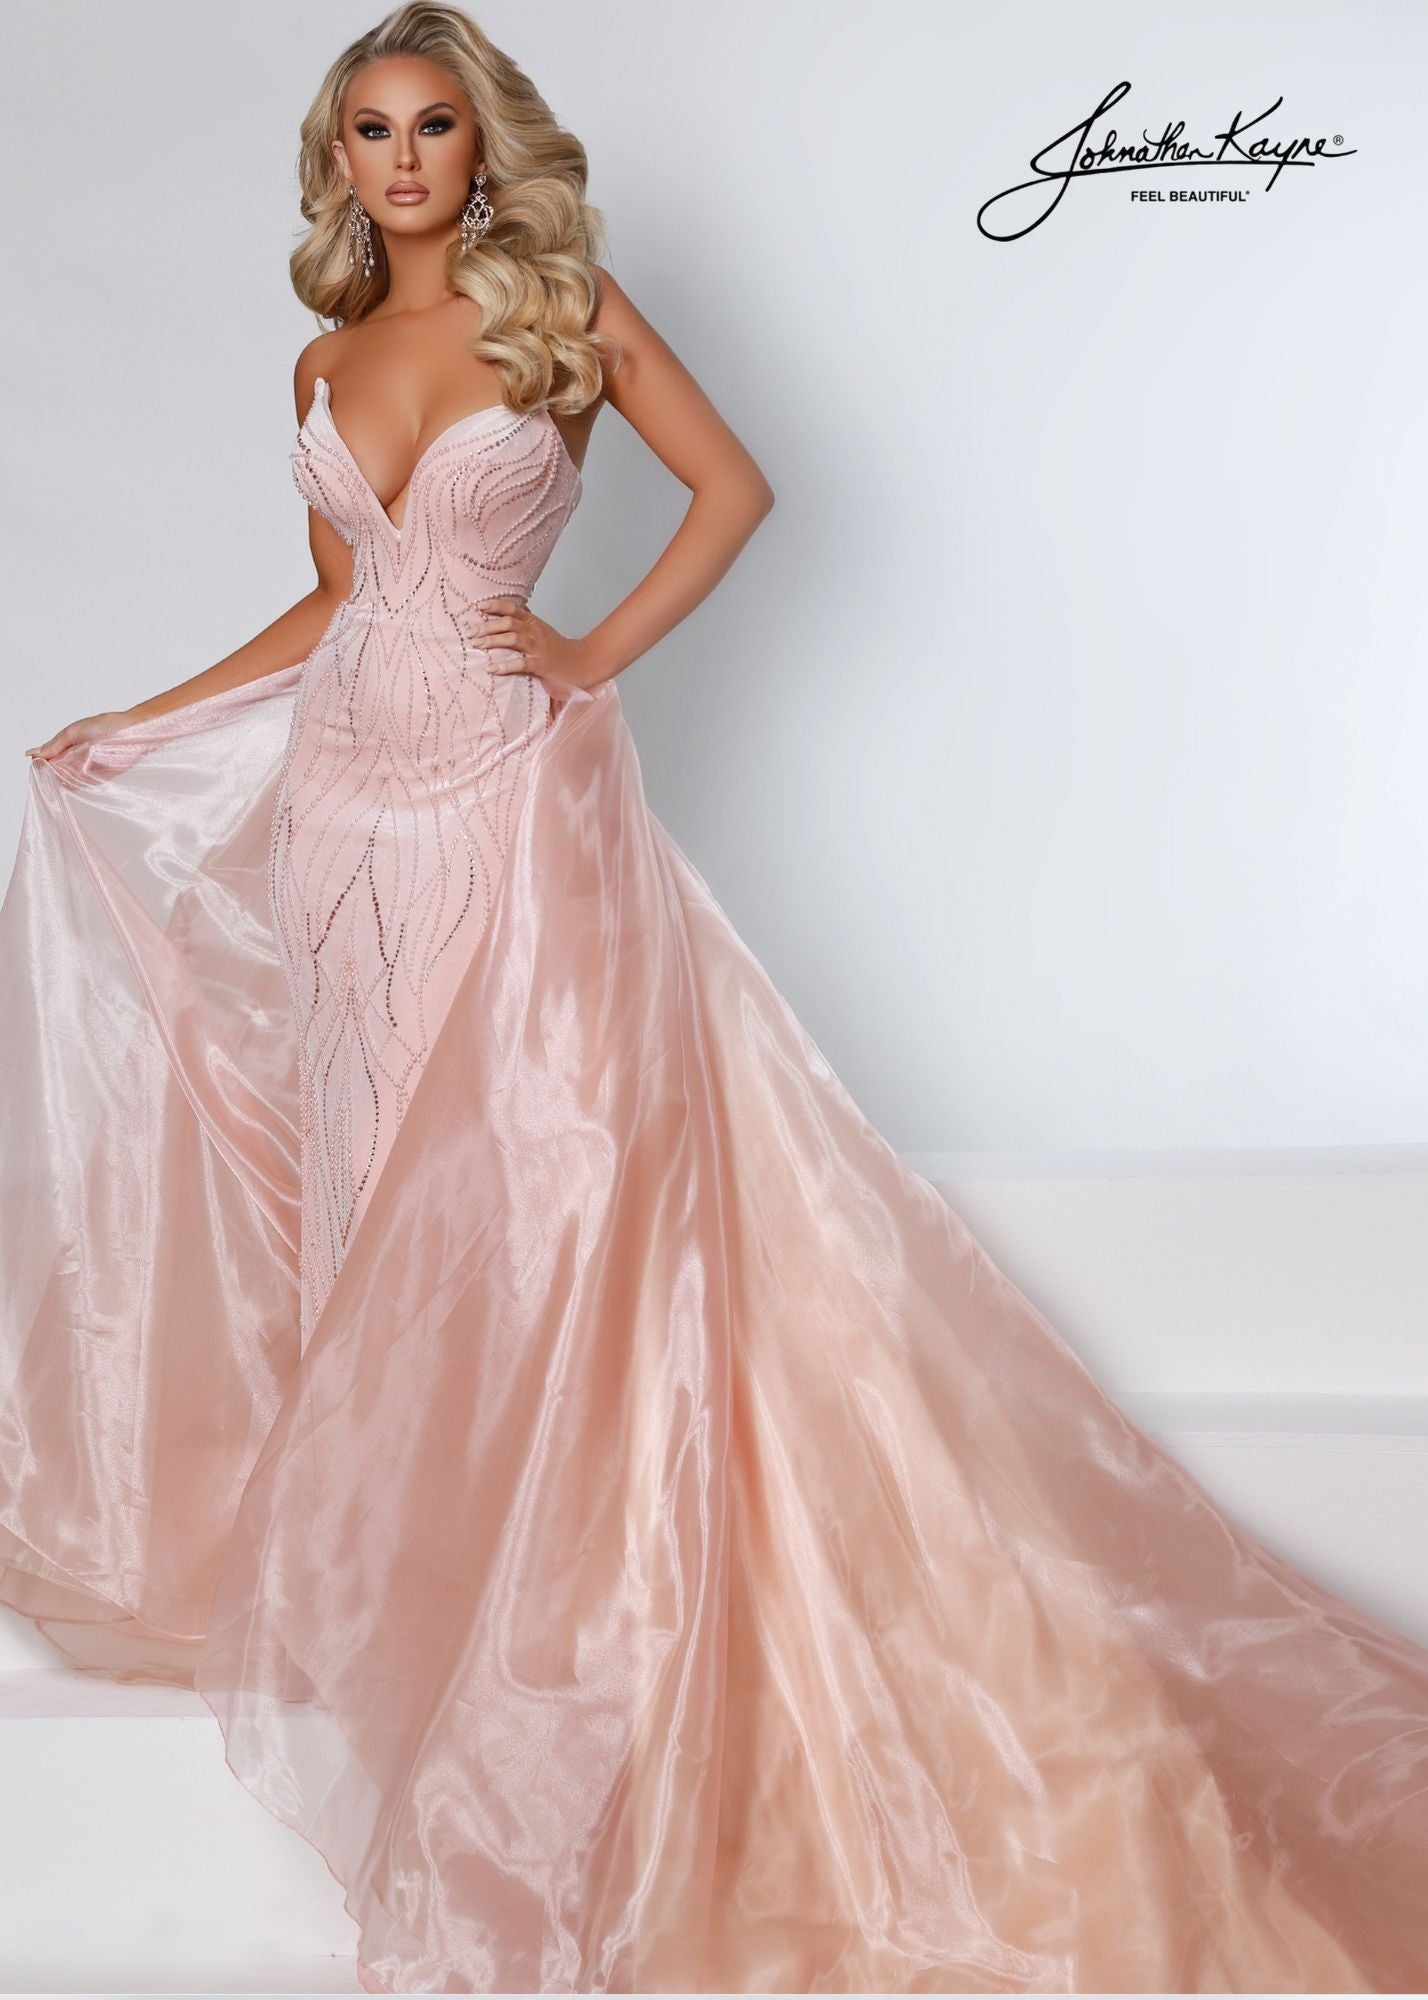 Johnathan-Kayne-2555-Blush-Pageant-Gown-strapless-plunging-neckline-embellished-velvet-fitted-evening-dress-with-full-organza-overskirt